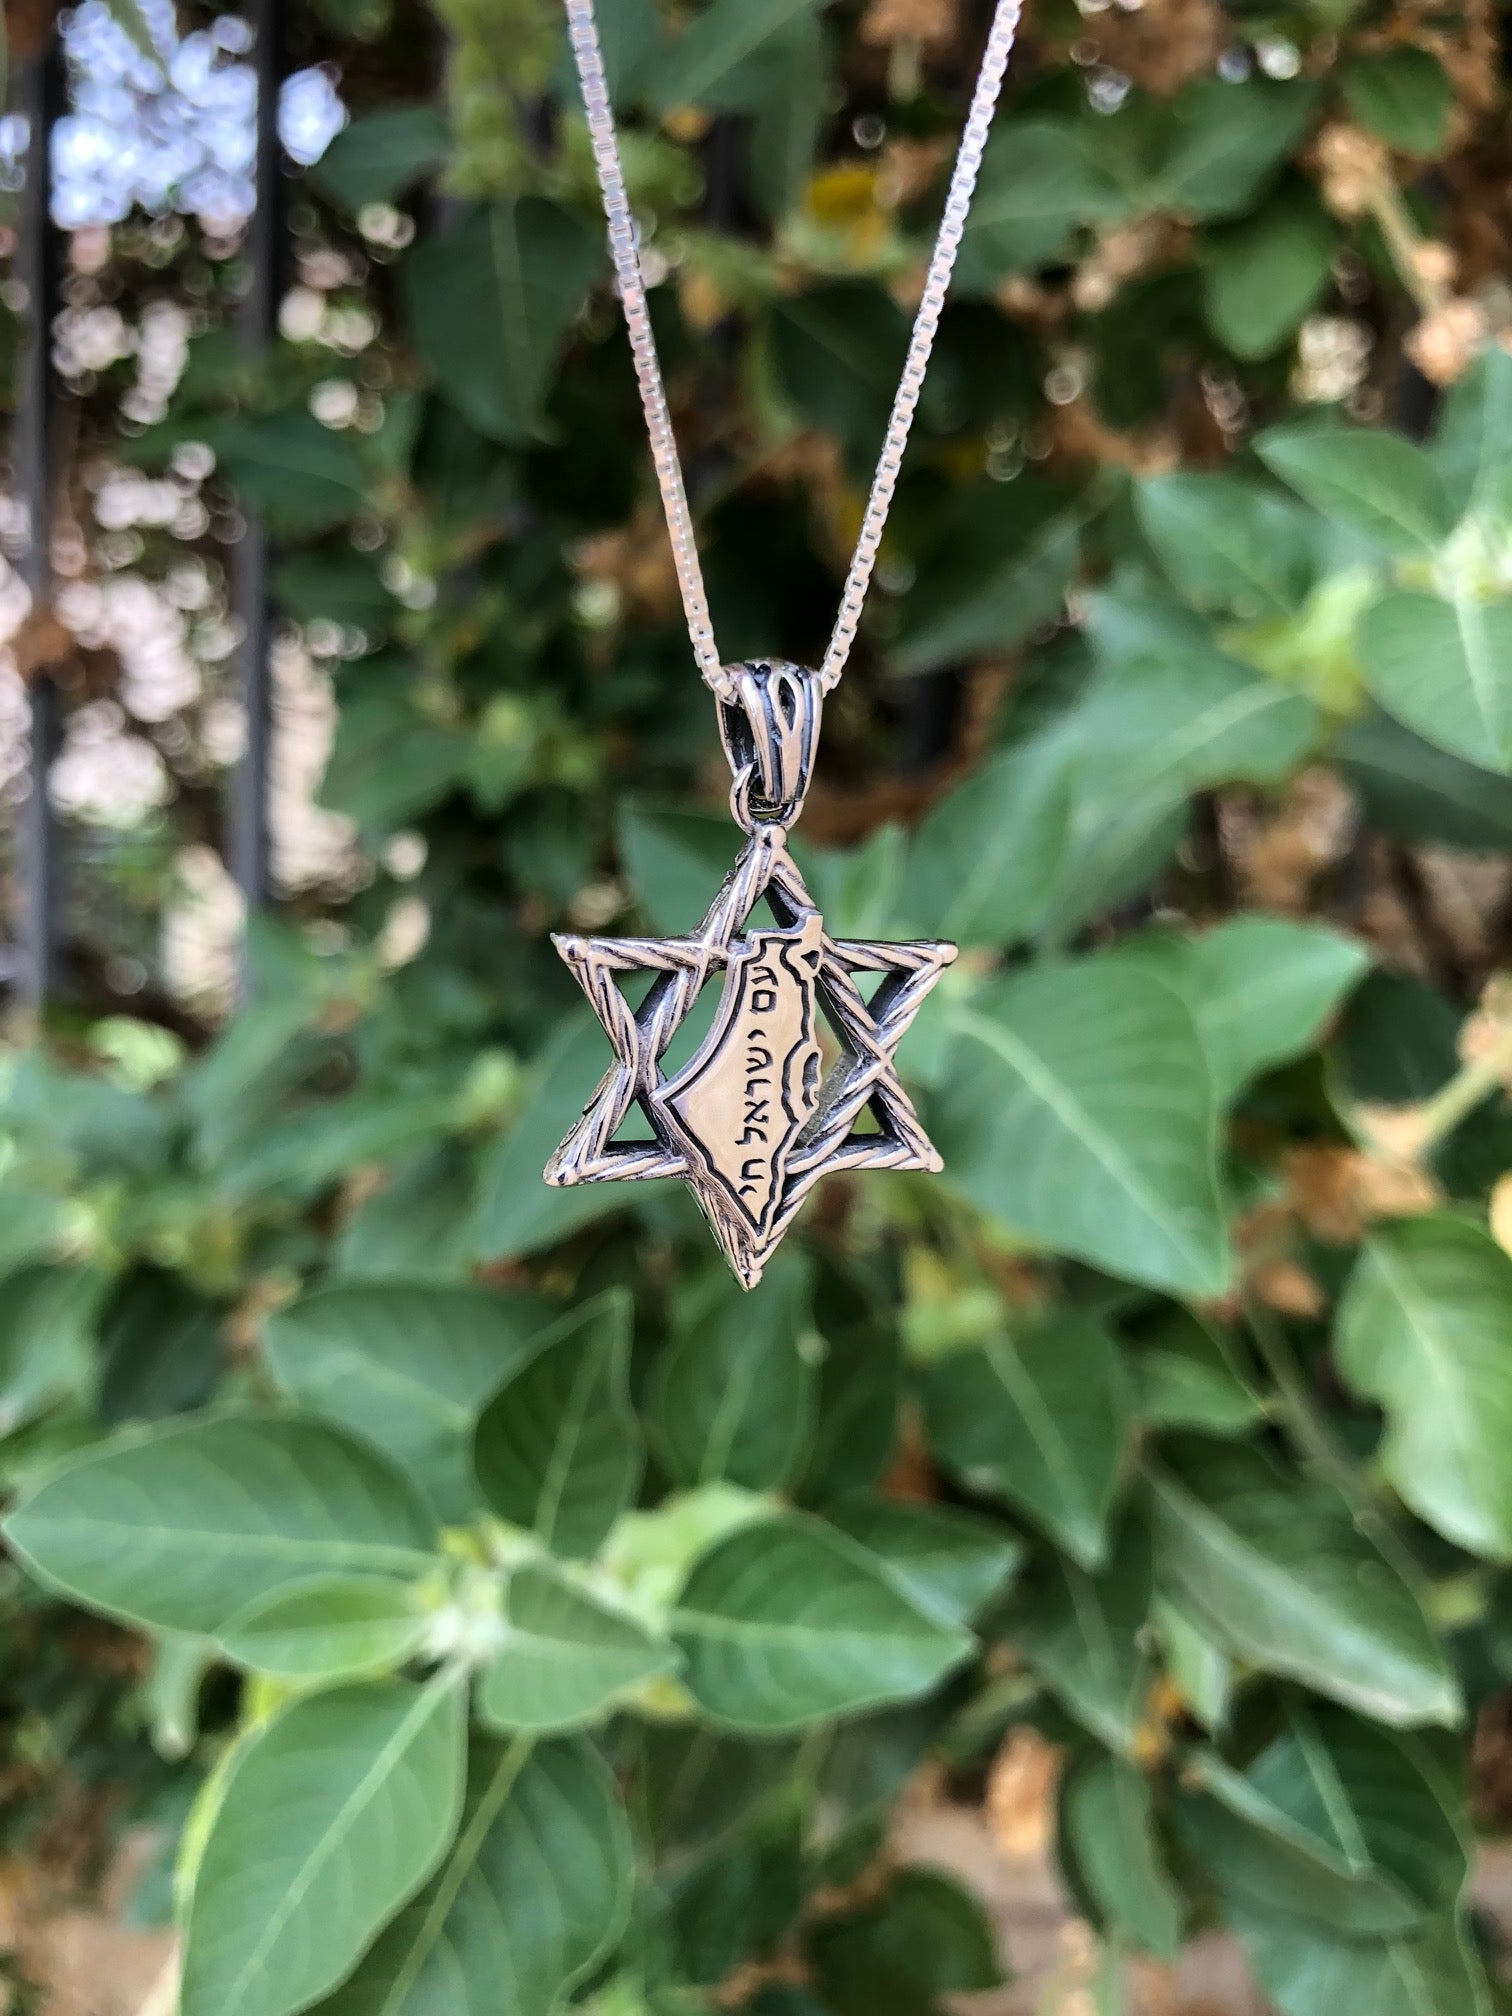 Star of David Necklace in Silver| Israel Jewelry Holy Land - Map of Israel Design | עם ישראל חי | Am Yisrael Chai | Israeli Gift Necklace